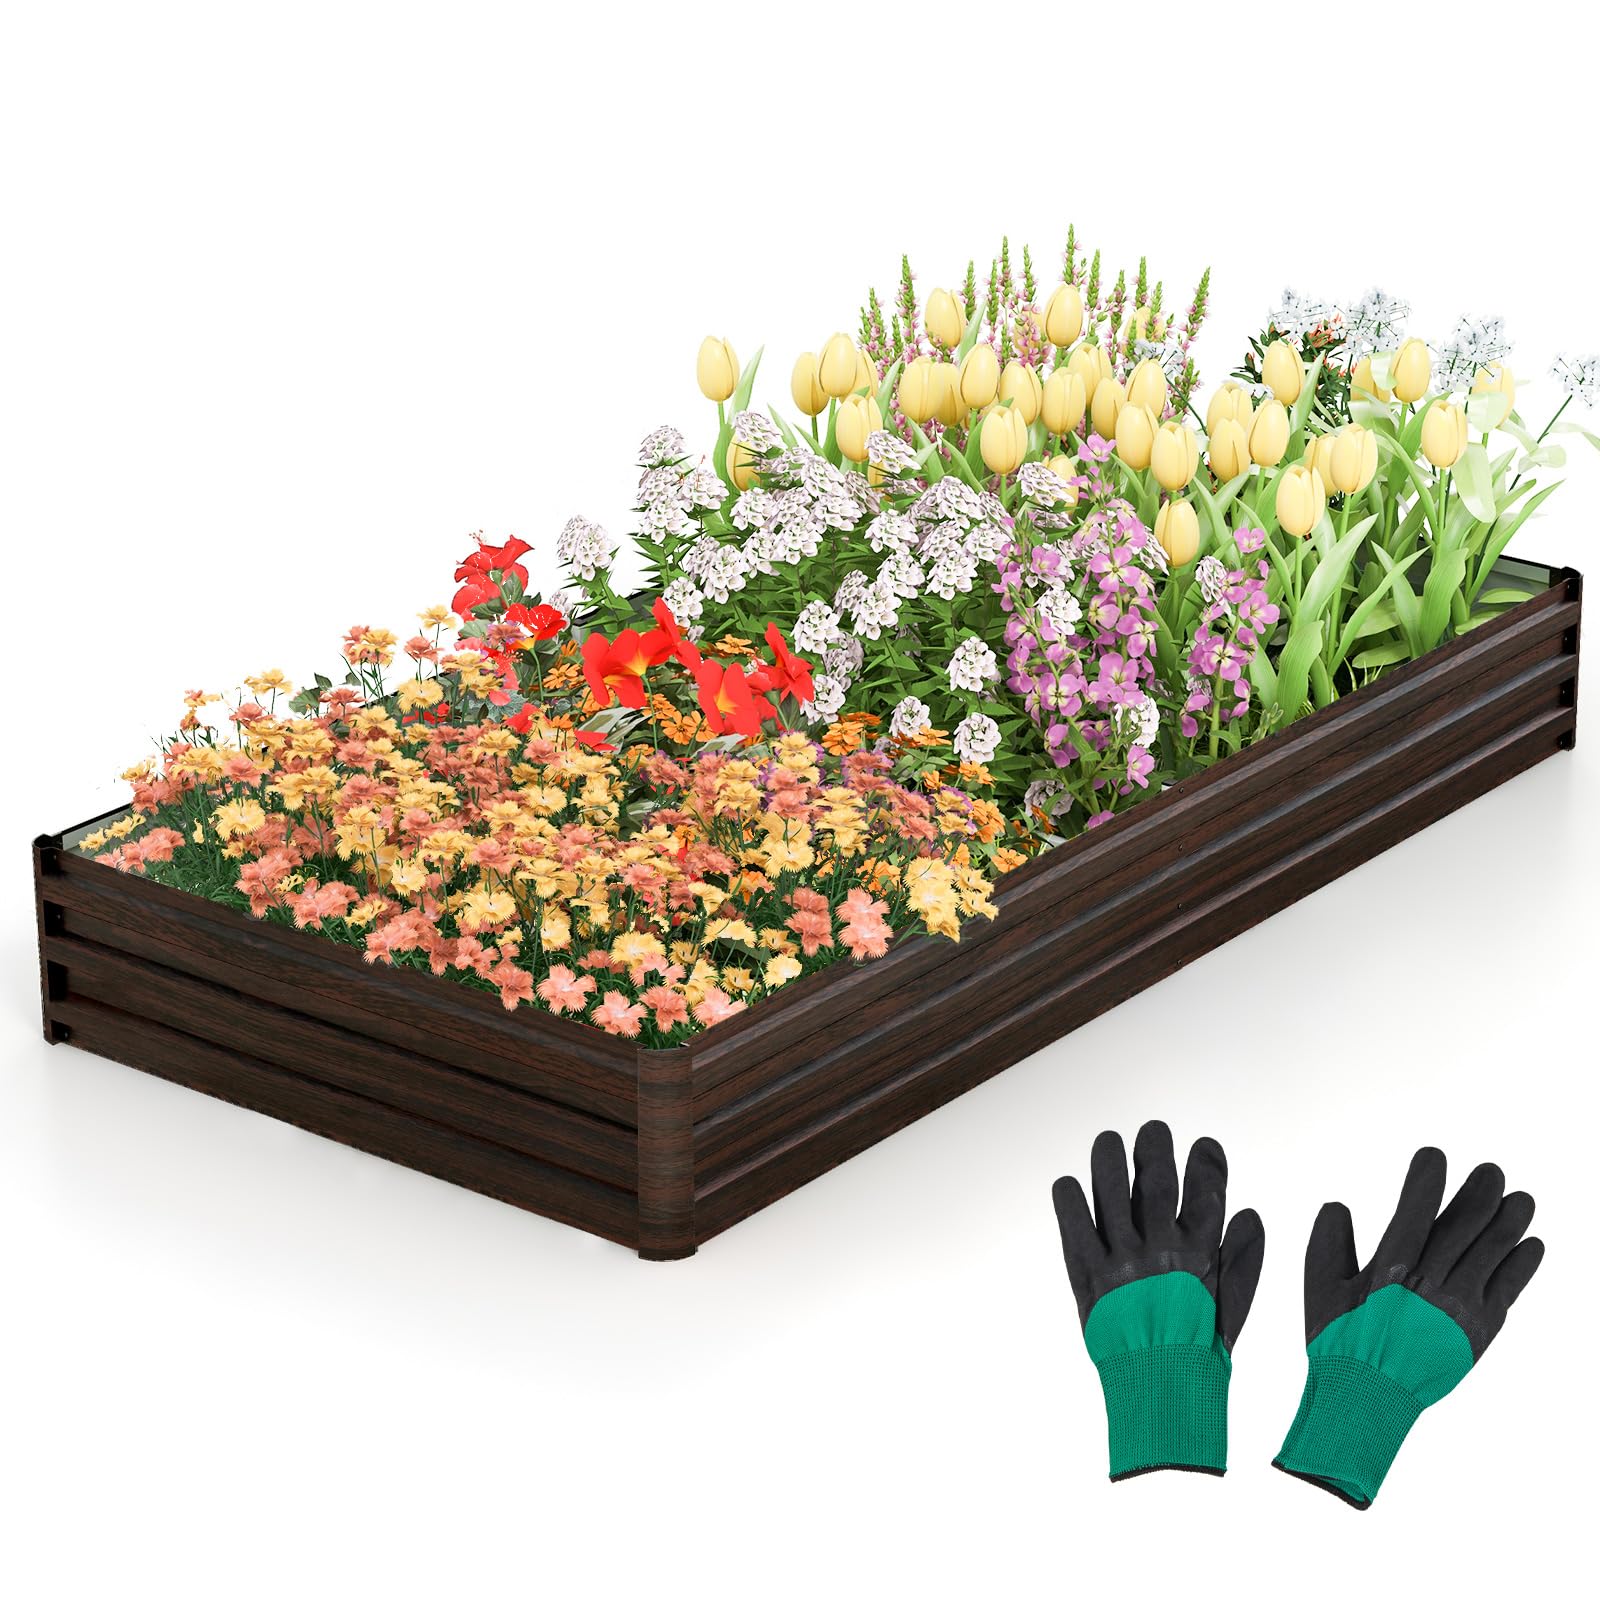 Giantex 8x4x1ft Metal Raised Garden Bed, Planter Box with Protective Edges